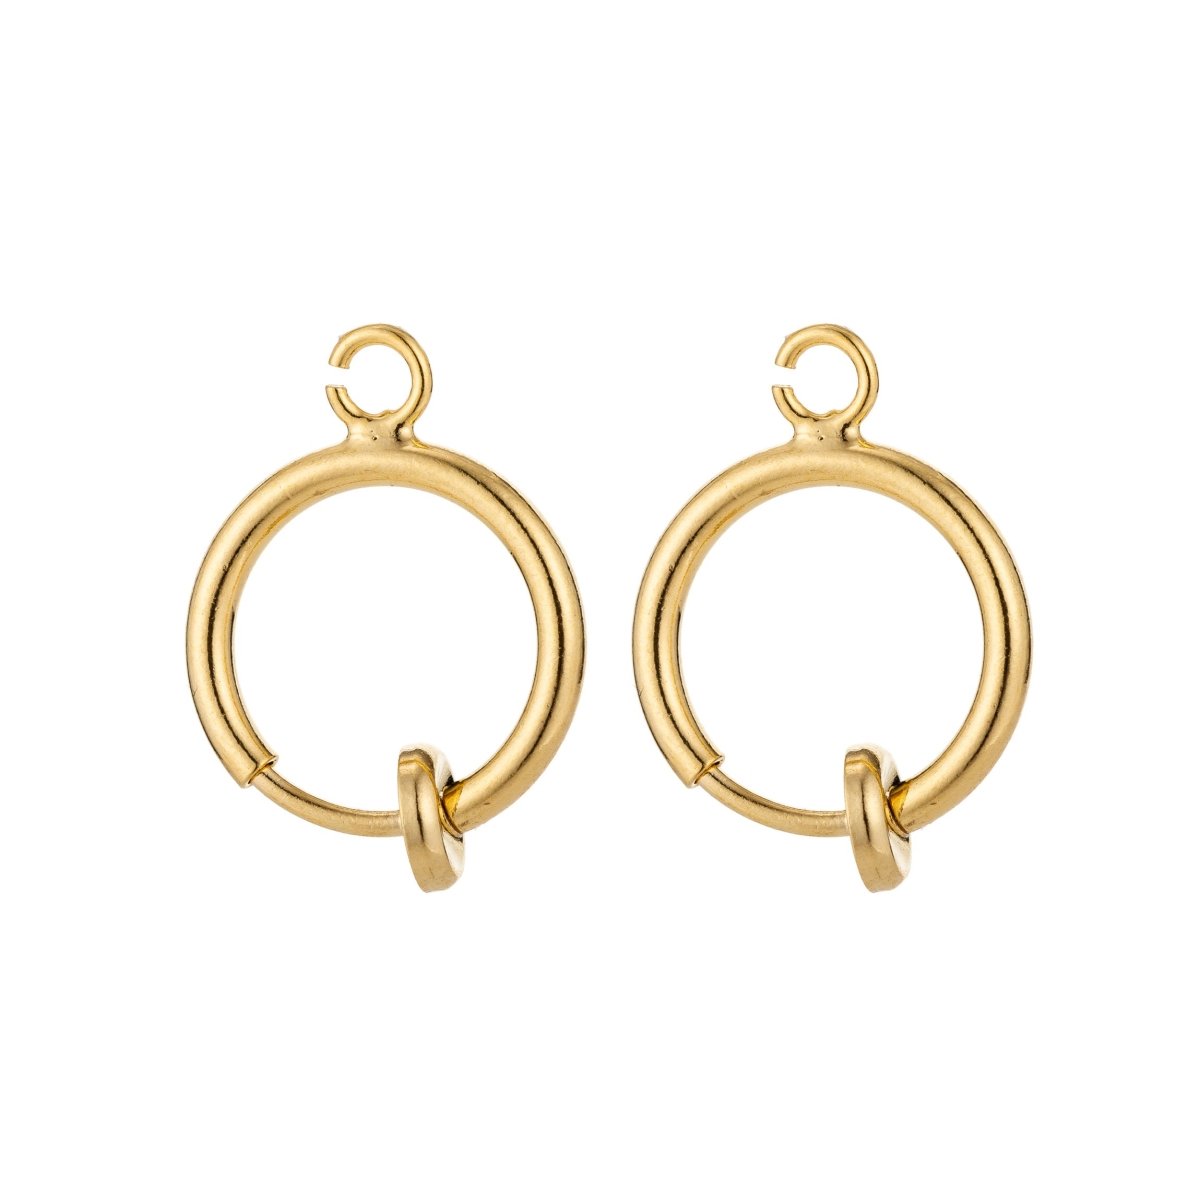 Clip On Earrings Gold Filled / White Gold Earring 12mm No Piercing Hoop Small Spring Clip on Earrings Ear Cuff One Touch open link L-508~L-511 - DLUXCA